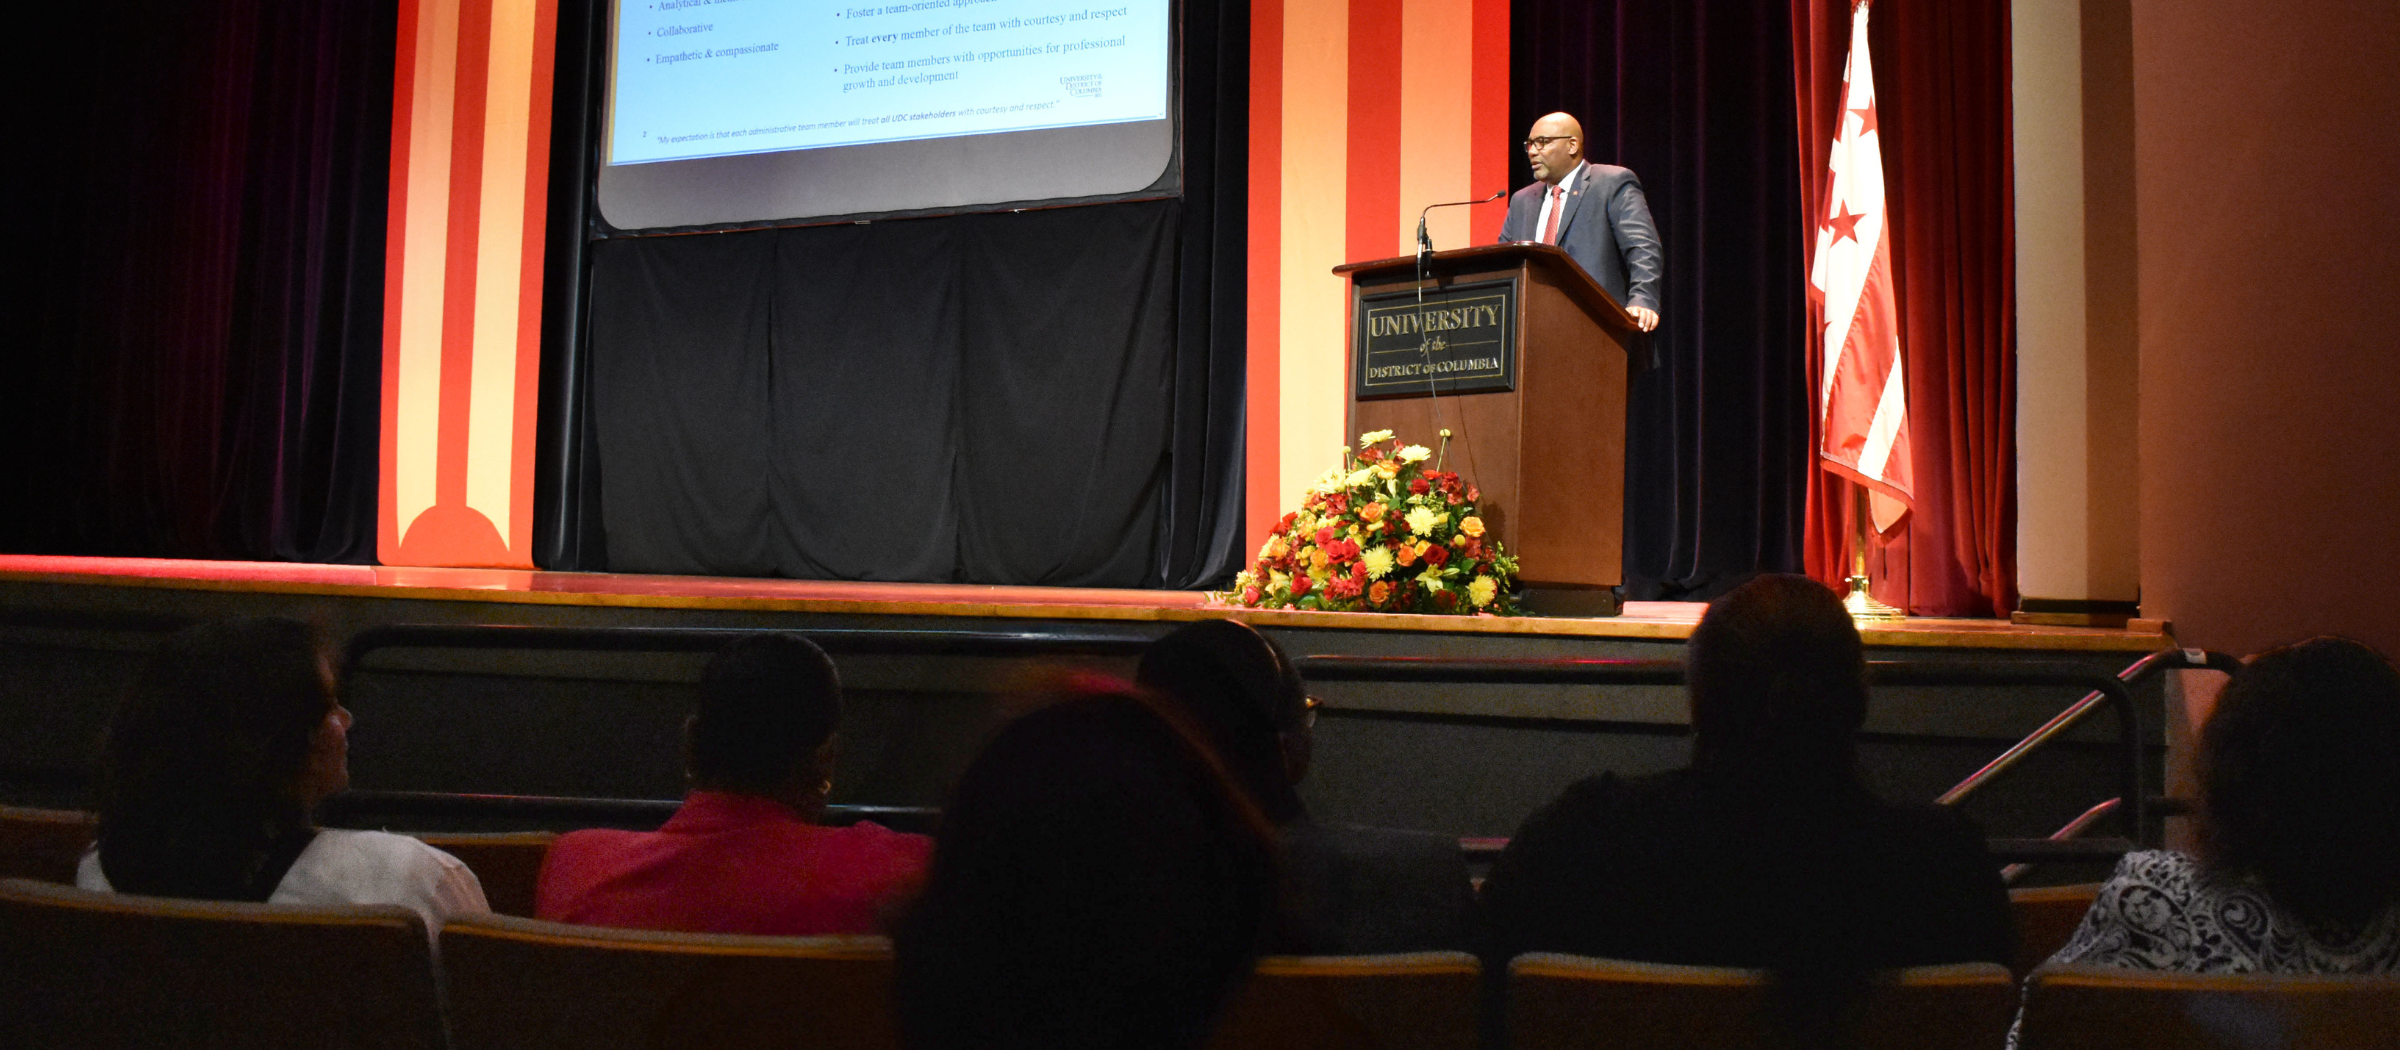 Fall Academic Forum Focuses on ‘Elevating Momentum’ at the University